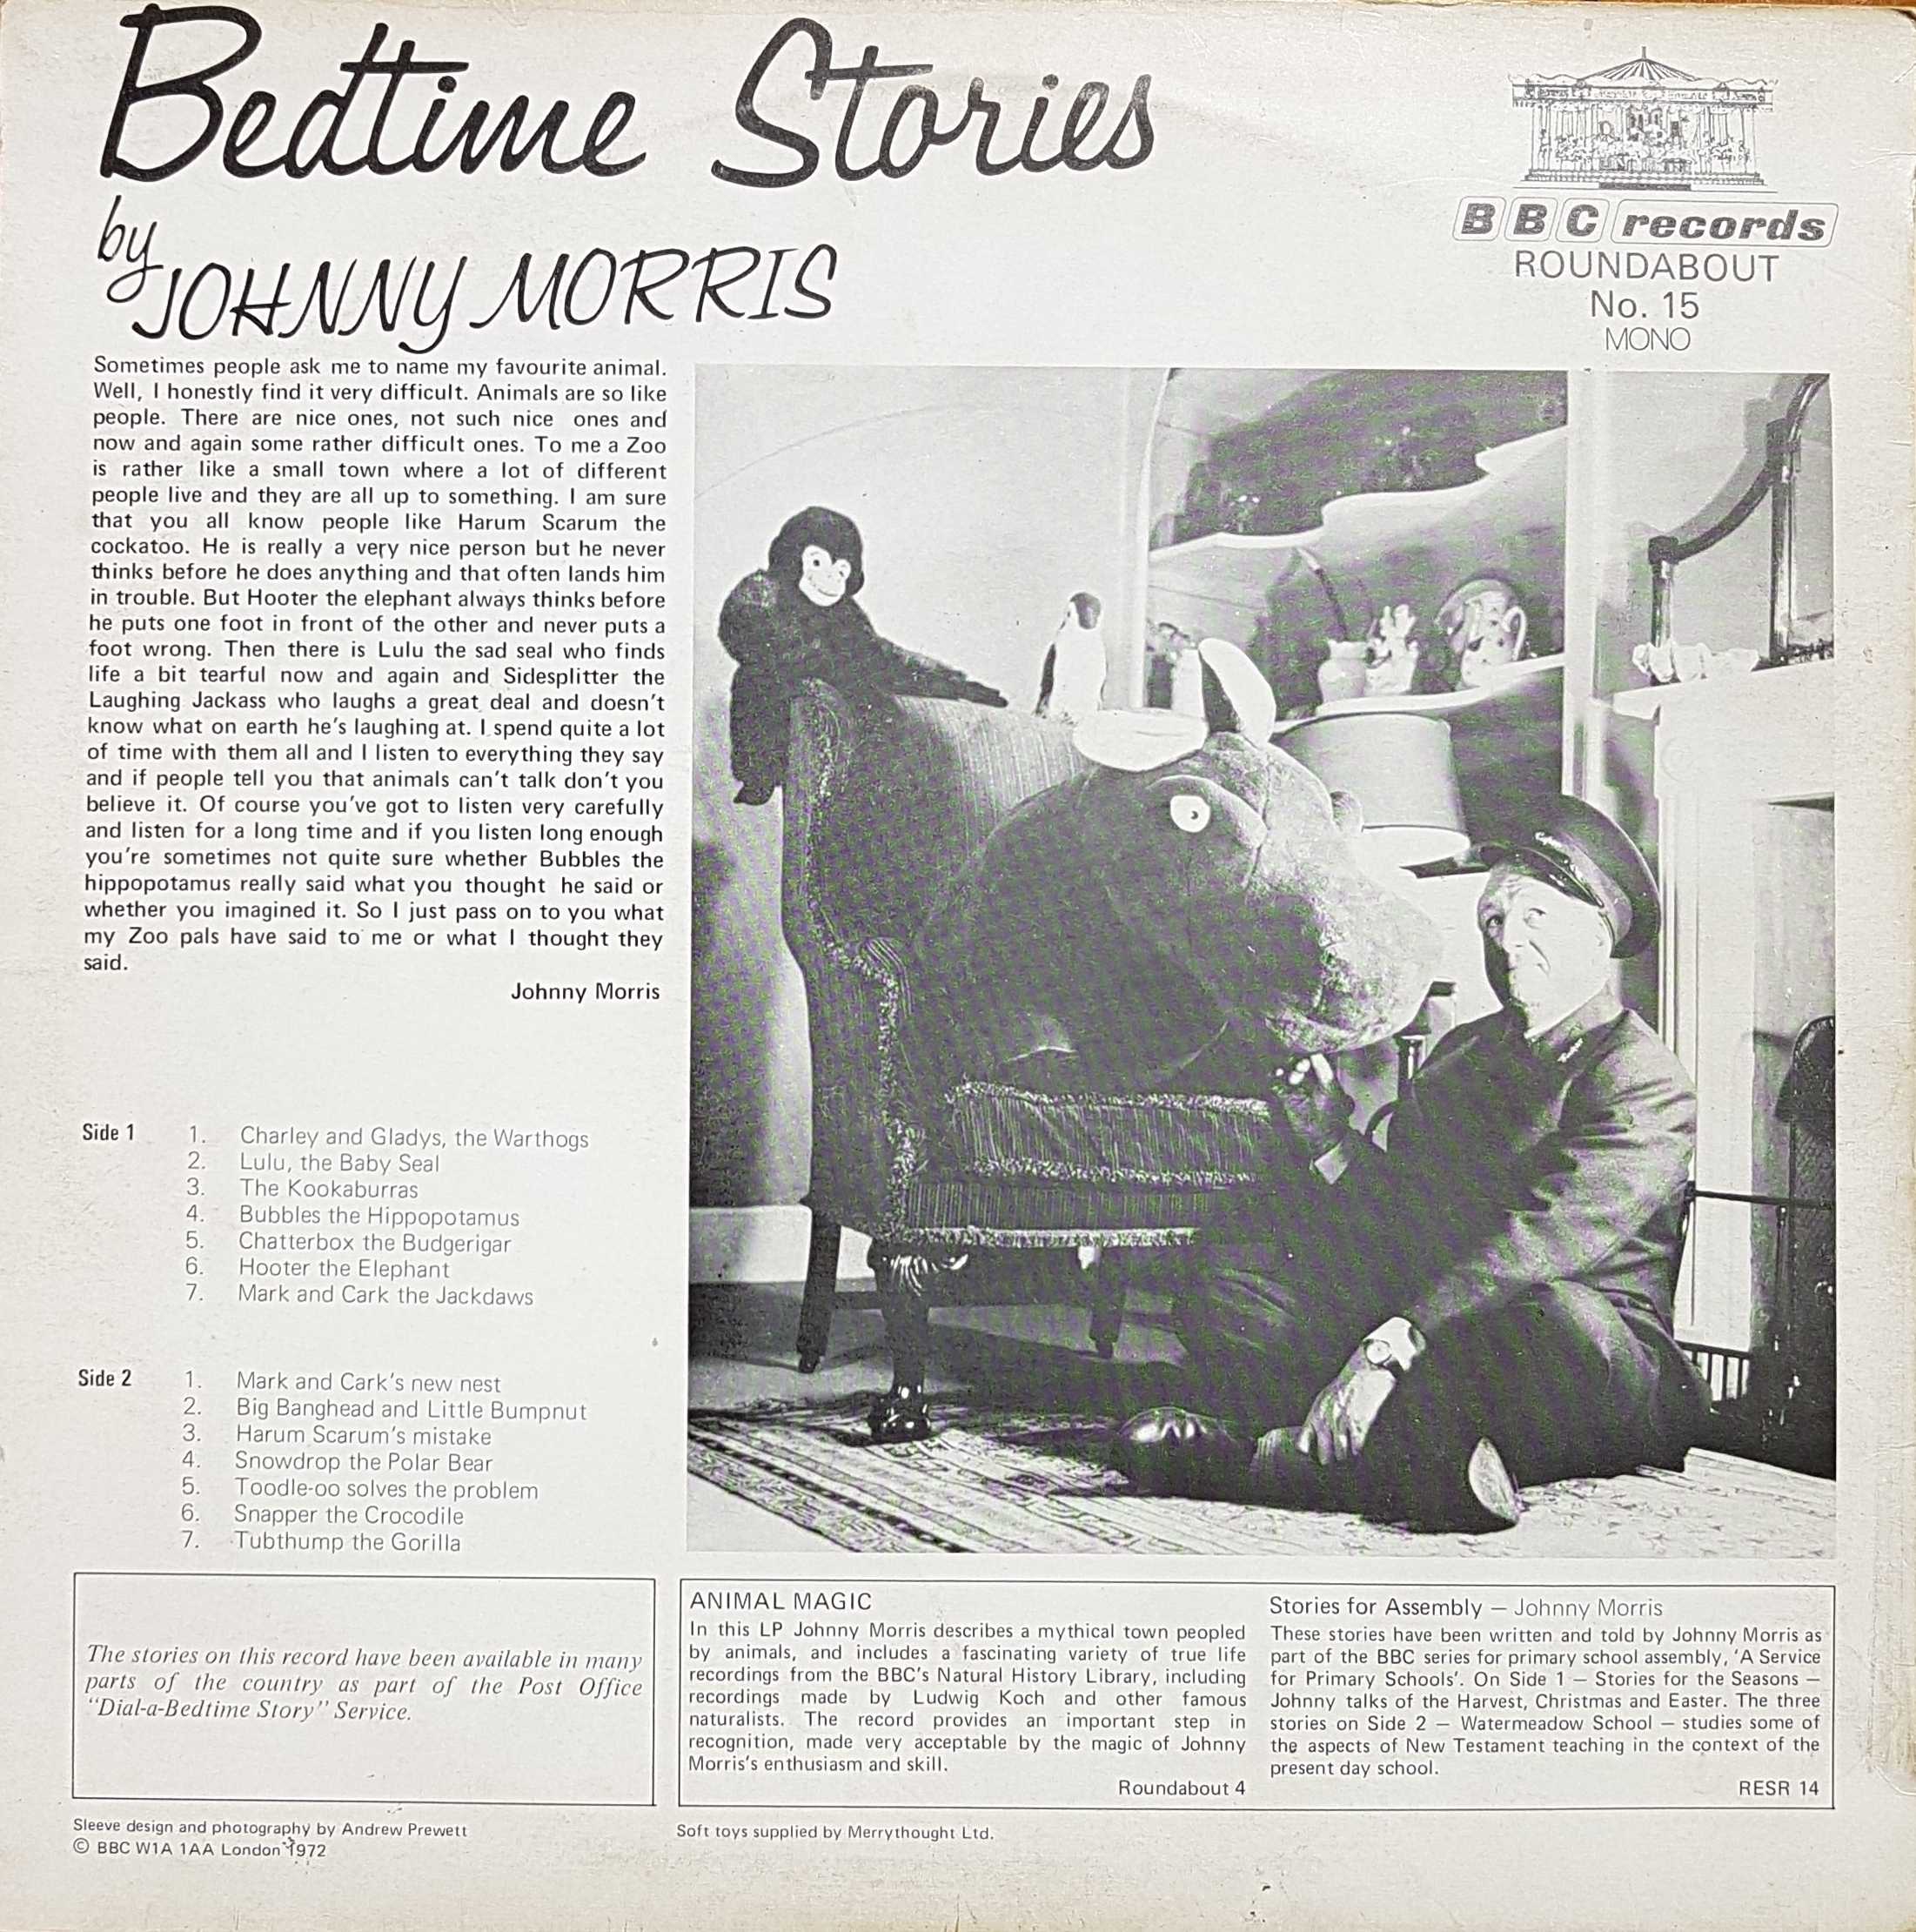 Picture of RBT 15 Bedtime stories by artist Johnny Morris from the BBC records and Tapes library